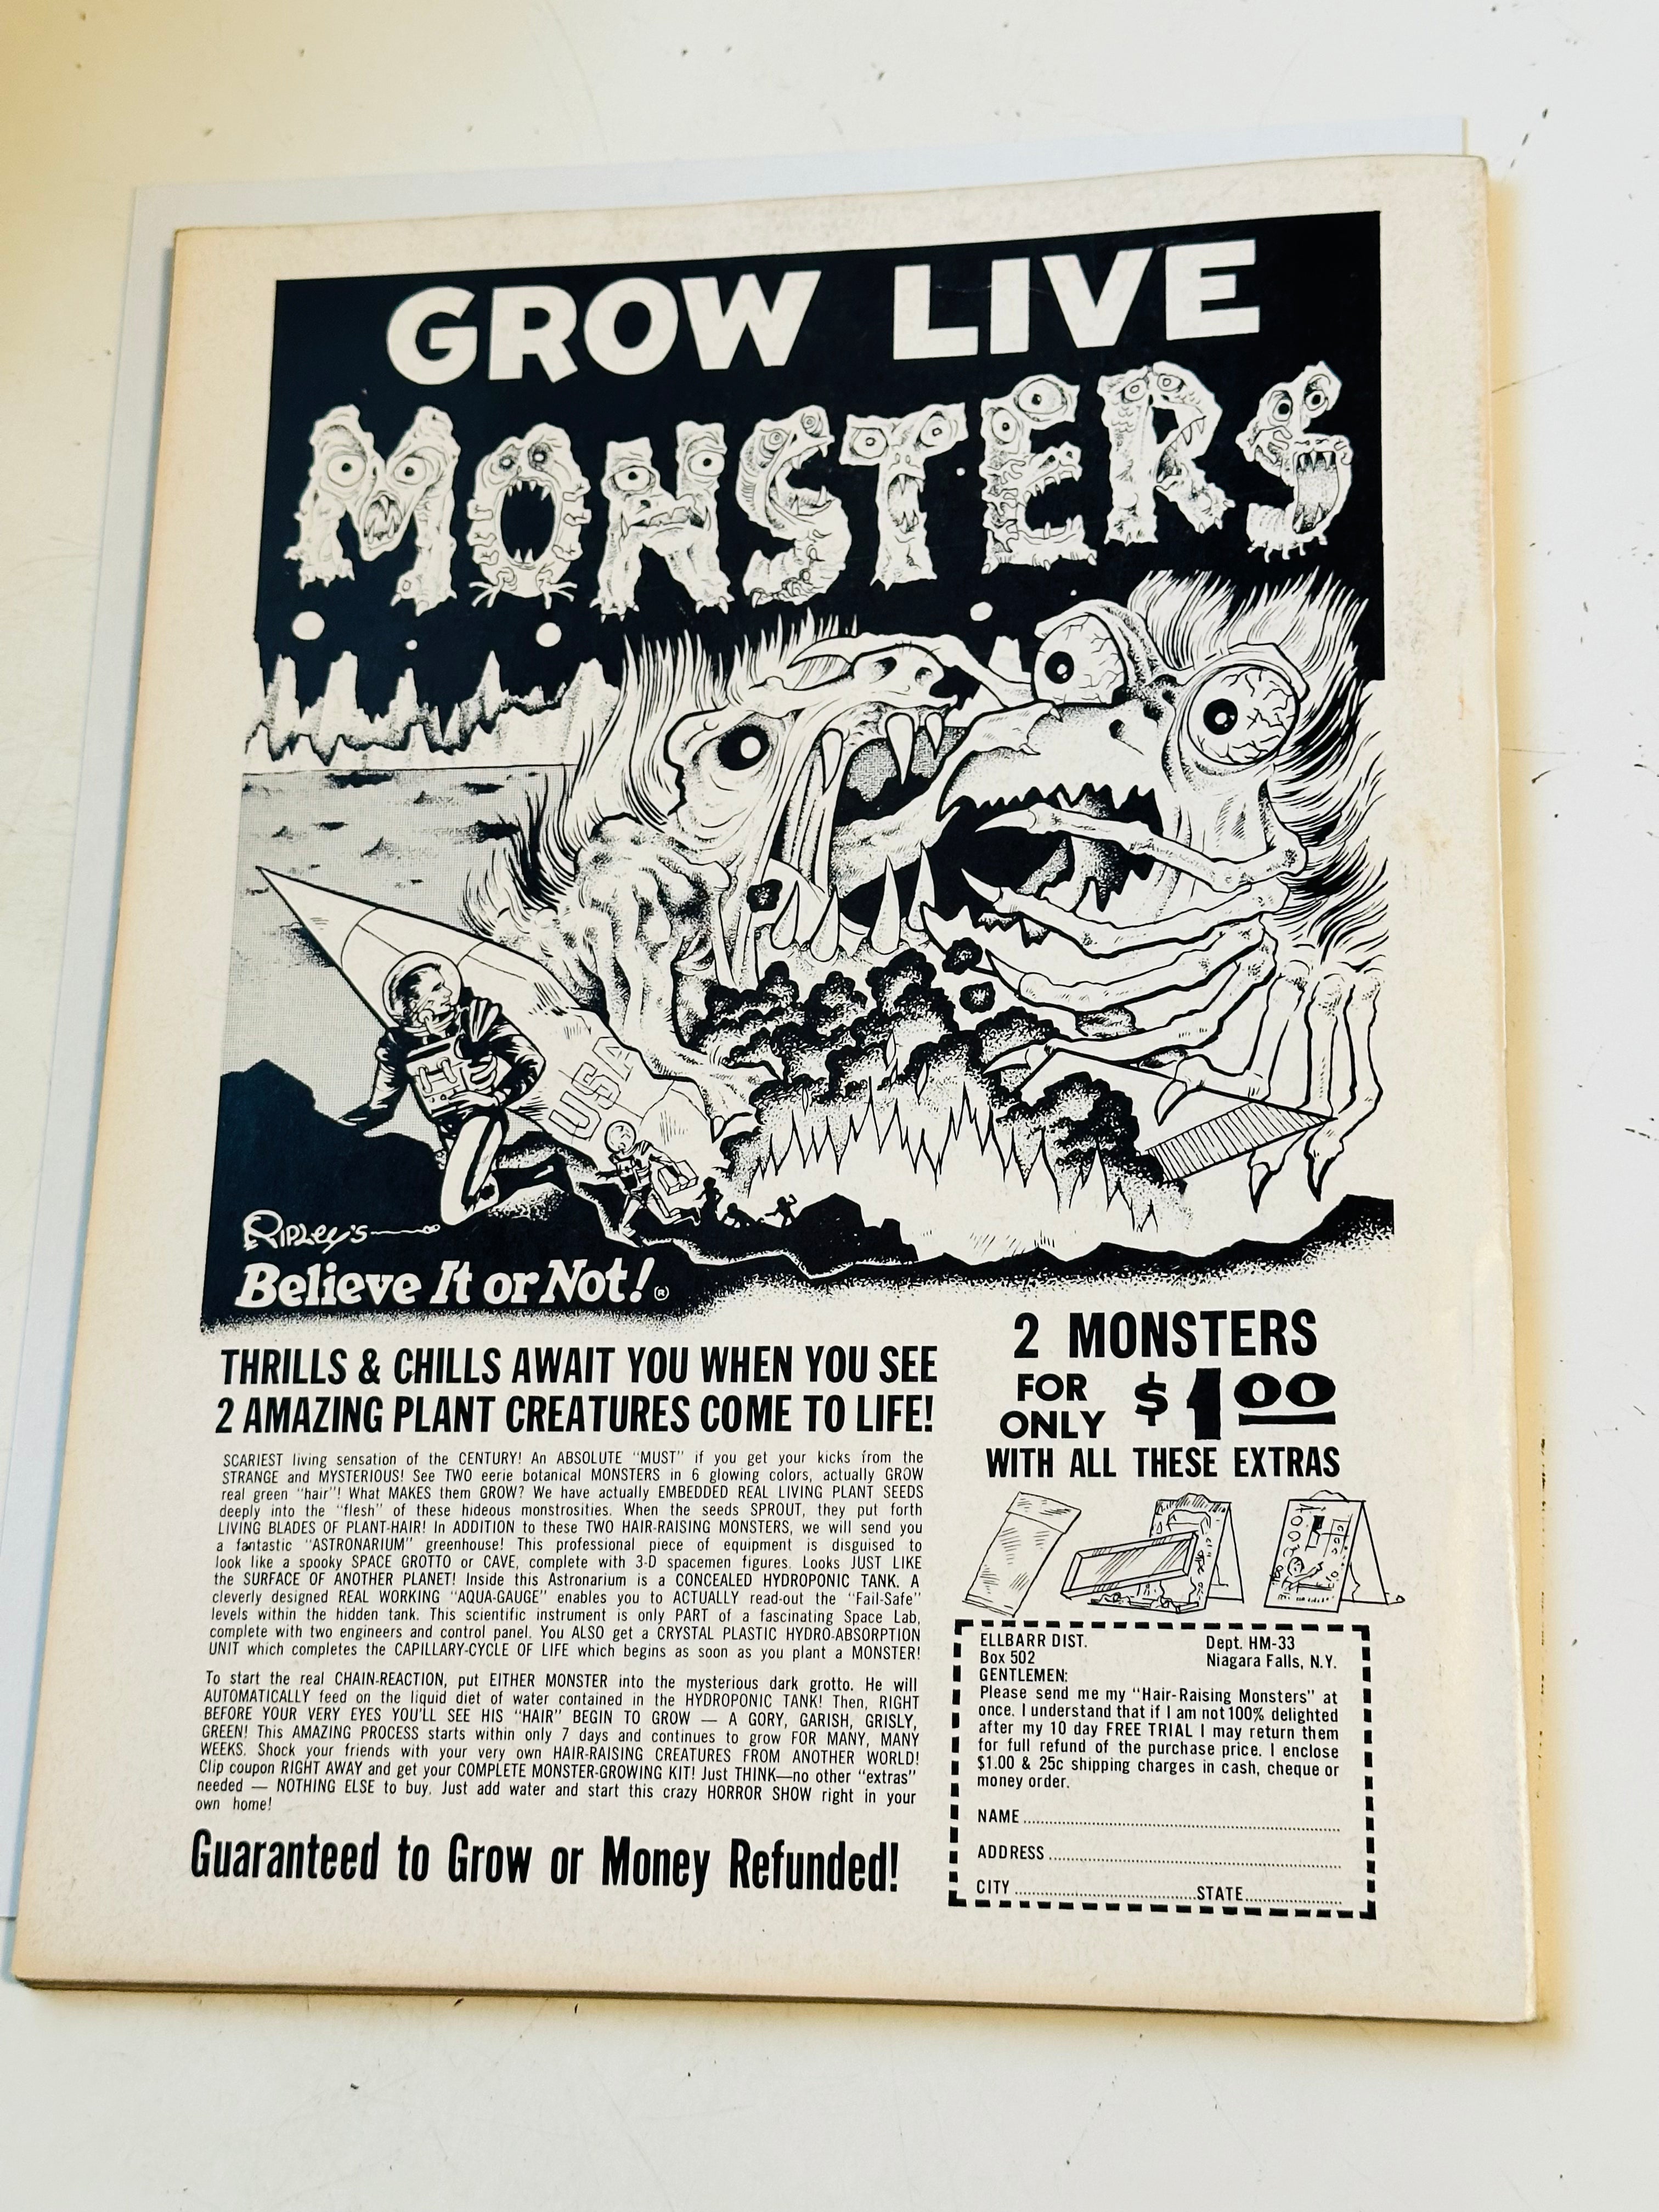 Famous monsters of Film land #32 magazine 1965